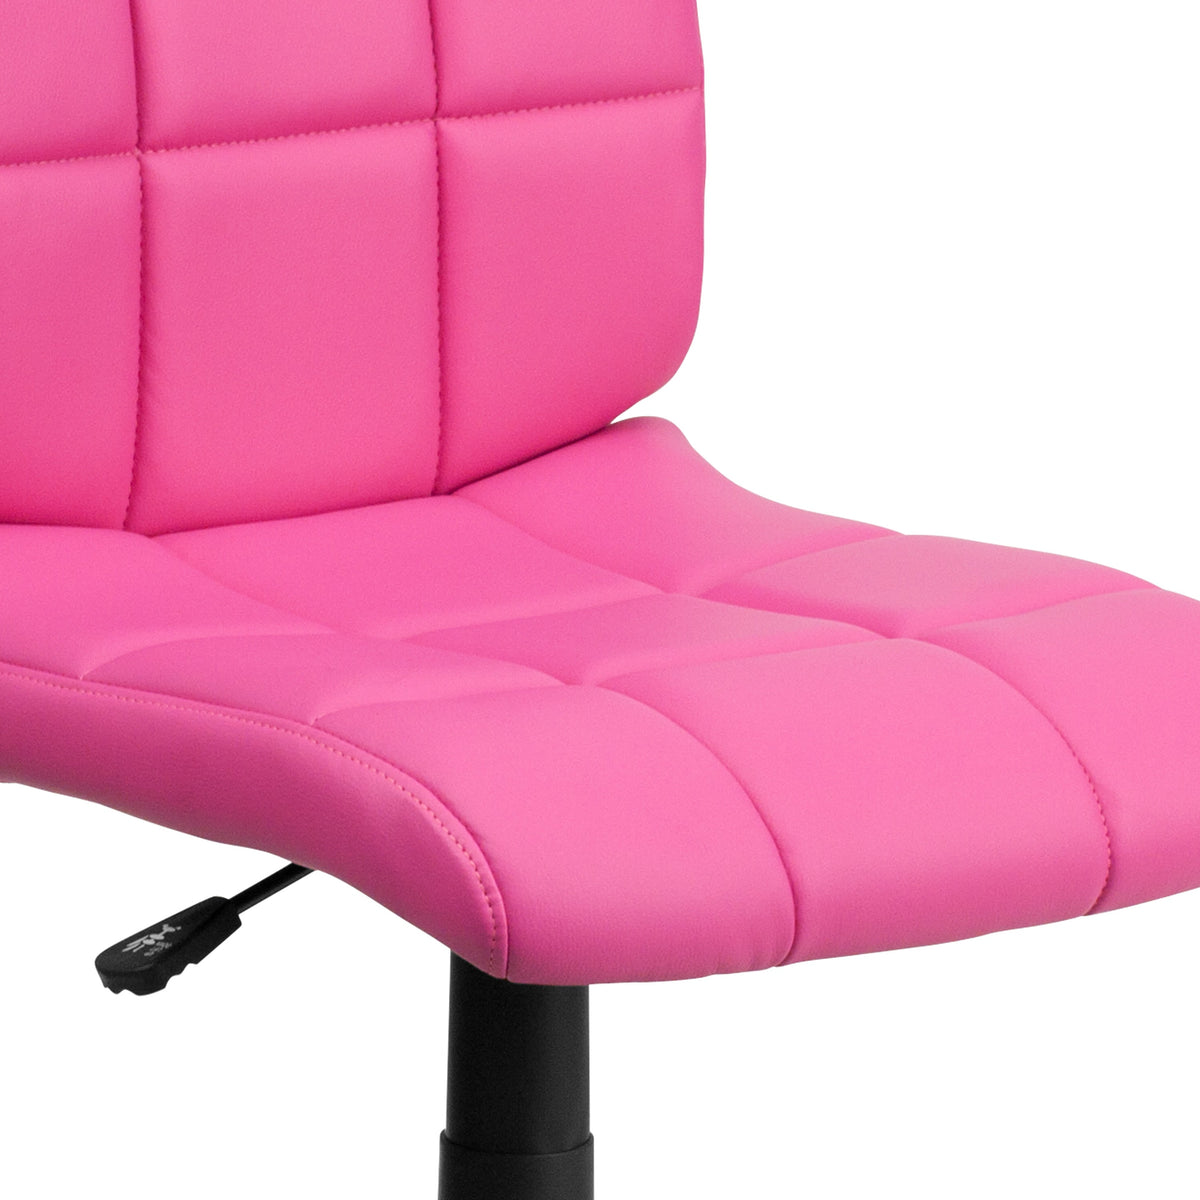 Pink |#| Mid-Back Pink Quilted Vinyl Swivel Task Office Chair - Home Office Chair